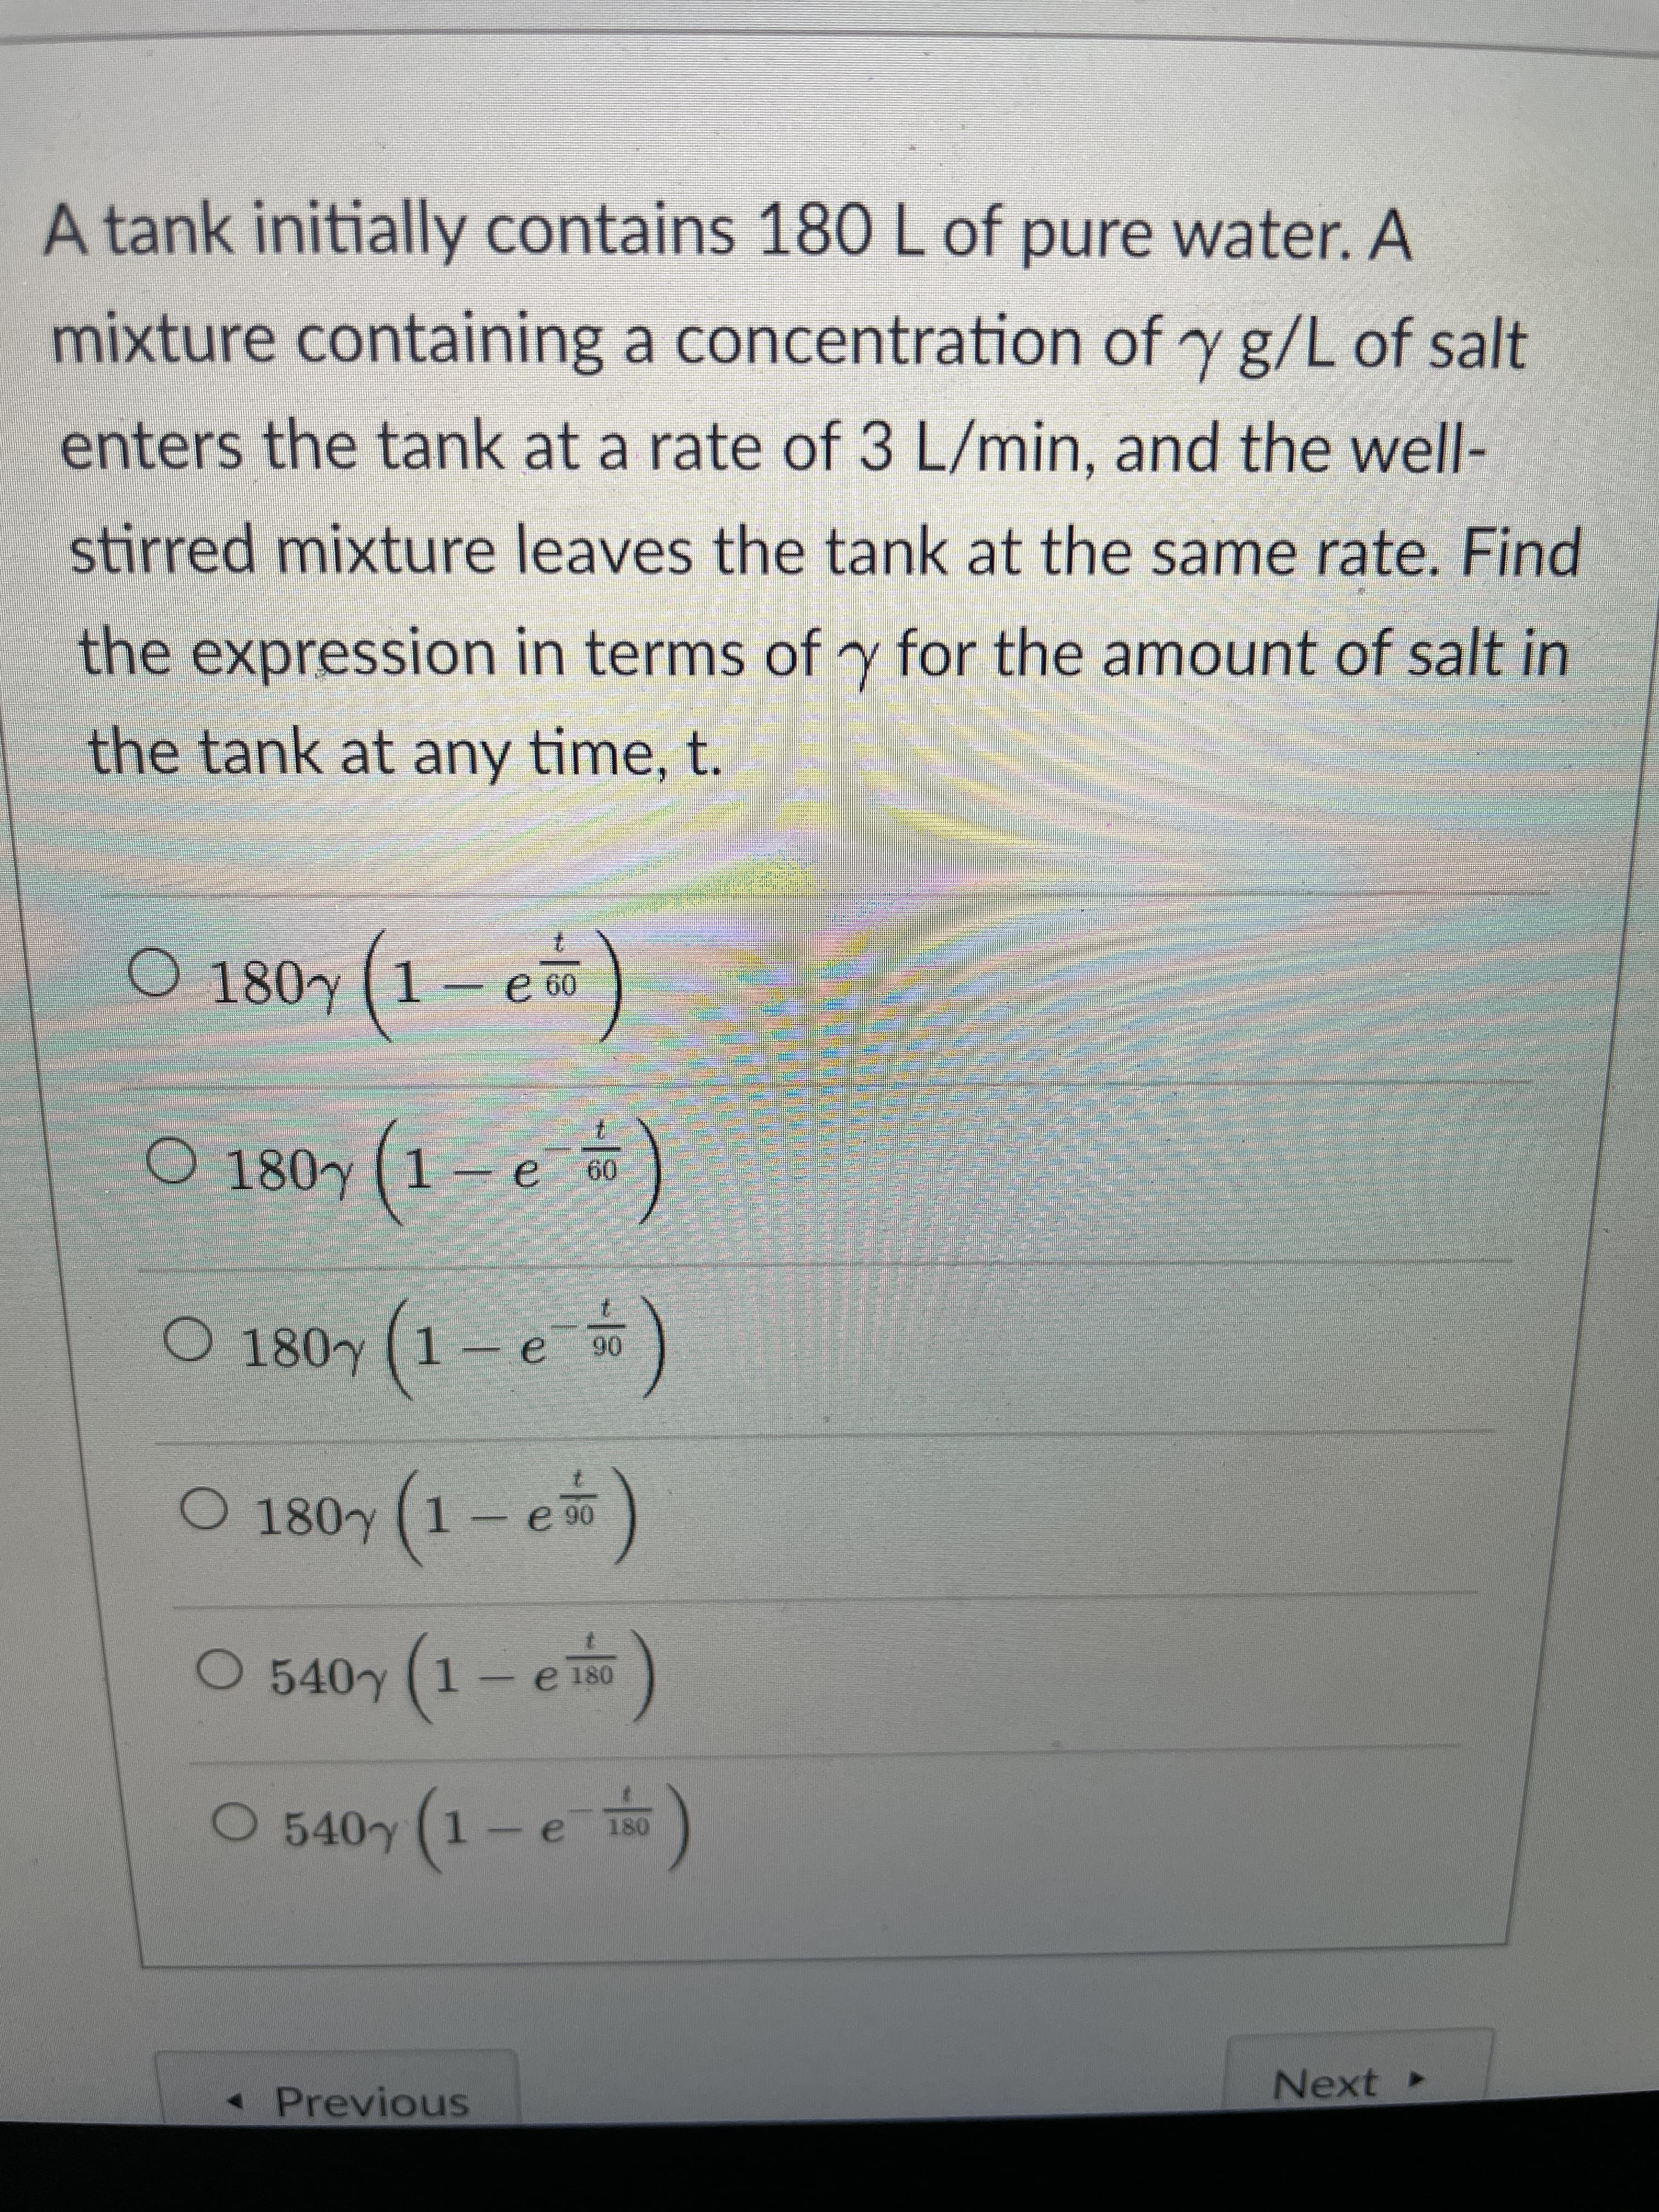 A tank initially contains 180 L of pure water. A
mixture containing a concentration of y g/L of salt
enters the tank at a rate of 3 L/min, and the well-
stirred mixture leaves the tank at the same rate. Find
the expression in terms of y for the amount of salt in
the tank at any time, t.
O 180y (1-e)
09 9
O 180y (1 – e )
O 180y (1-e)
O 180y (1-e)
O 540y (1-e)
e 180
e
1-
« Previous
Next ►
